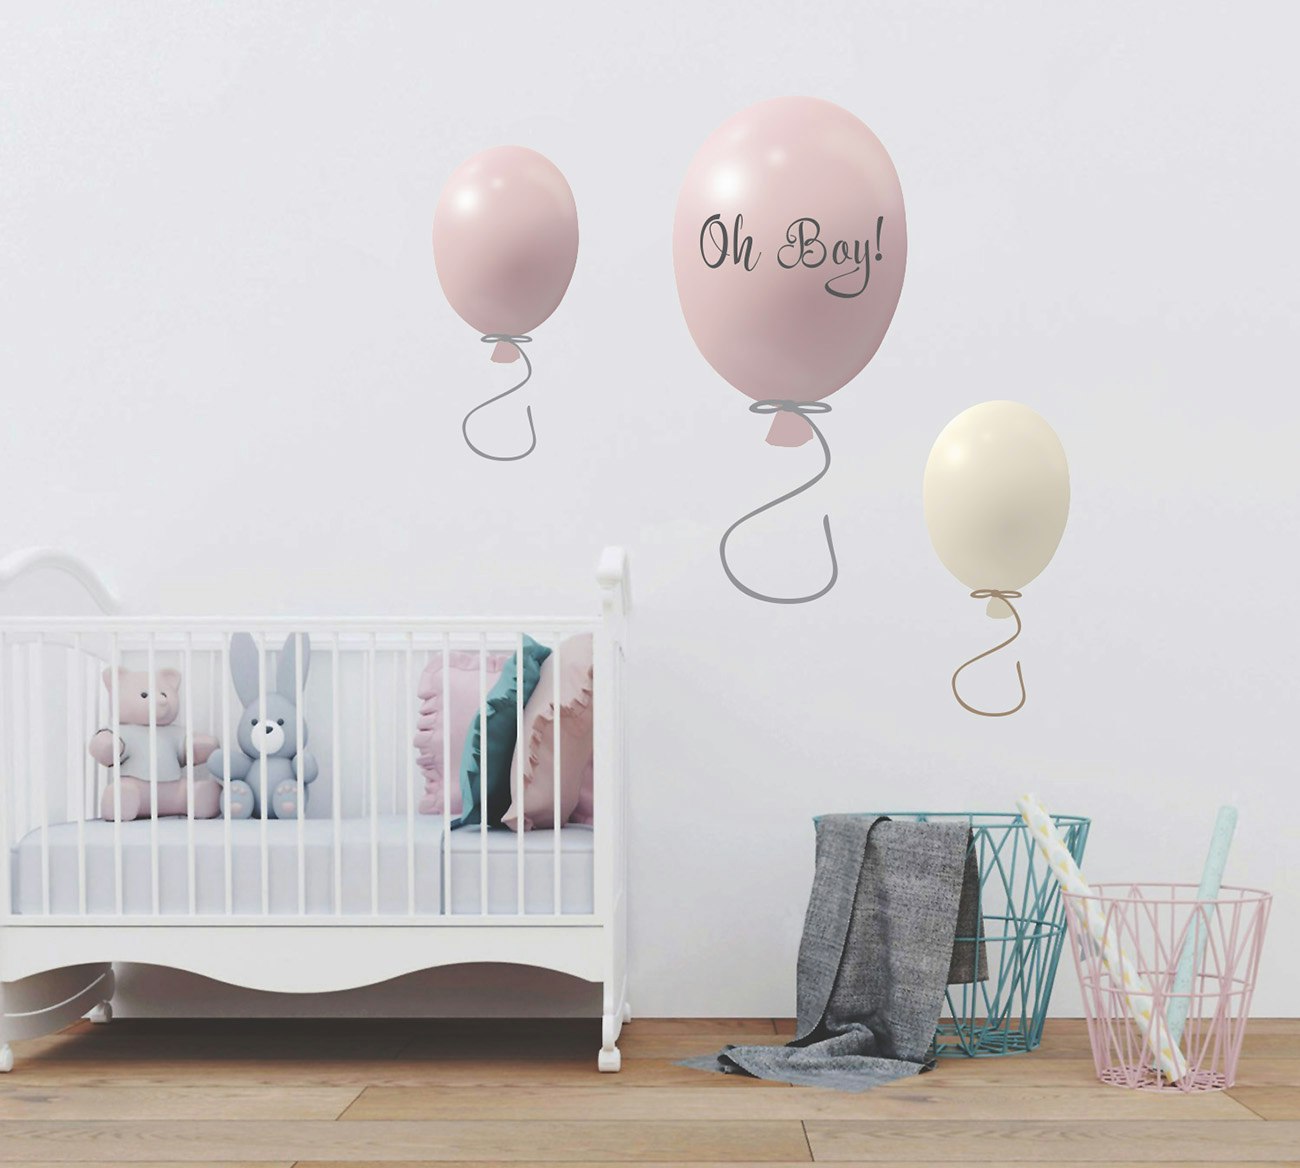 Wall sticker party balloons set of 3, powder rose Wall sticker party balloons set of 3, powder rose